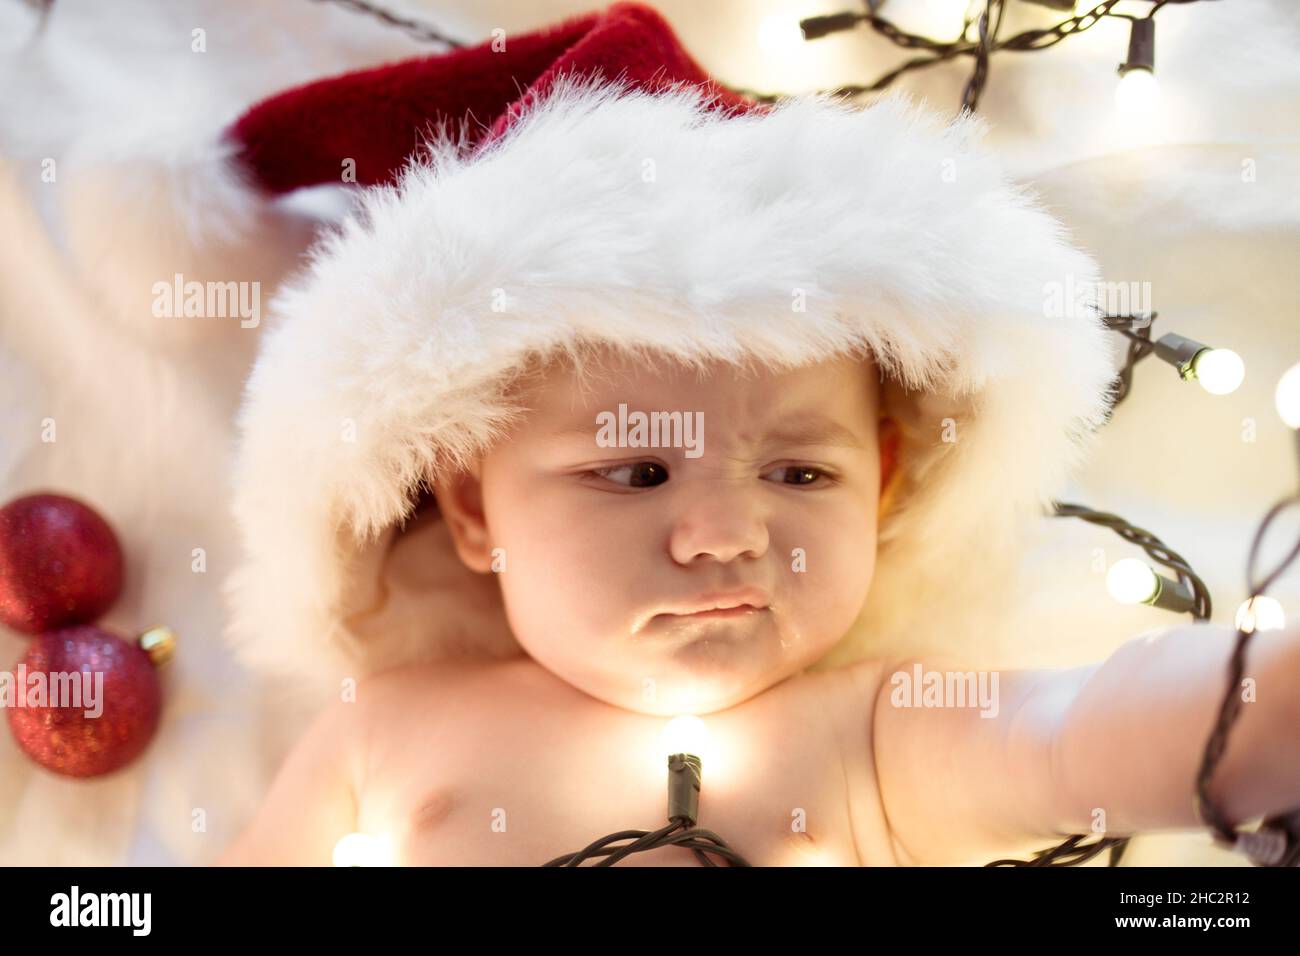 baby with funny look on face, christmas lights, red ornaments Stock Photo